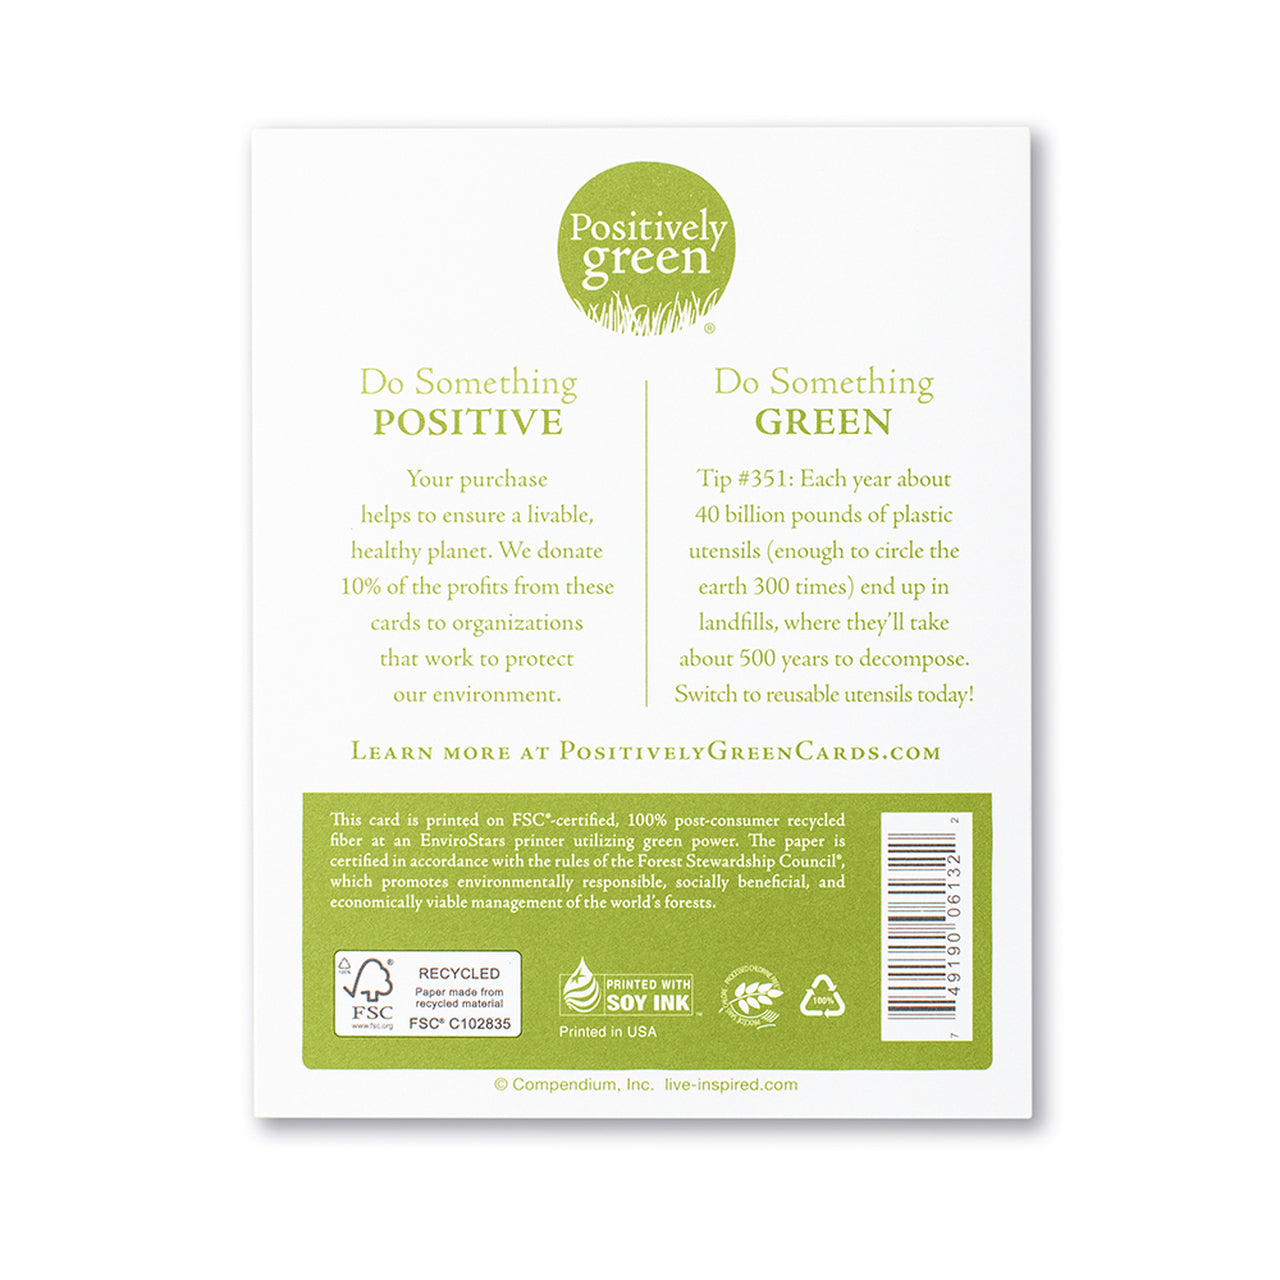 Positively Green Greeting Card - Birthday - "There Is Nothing Better Than Cake But More Cake" - Harry Truman - Mellow Monkey